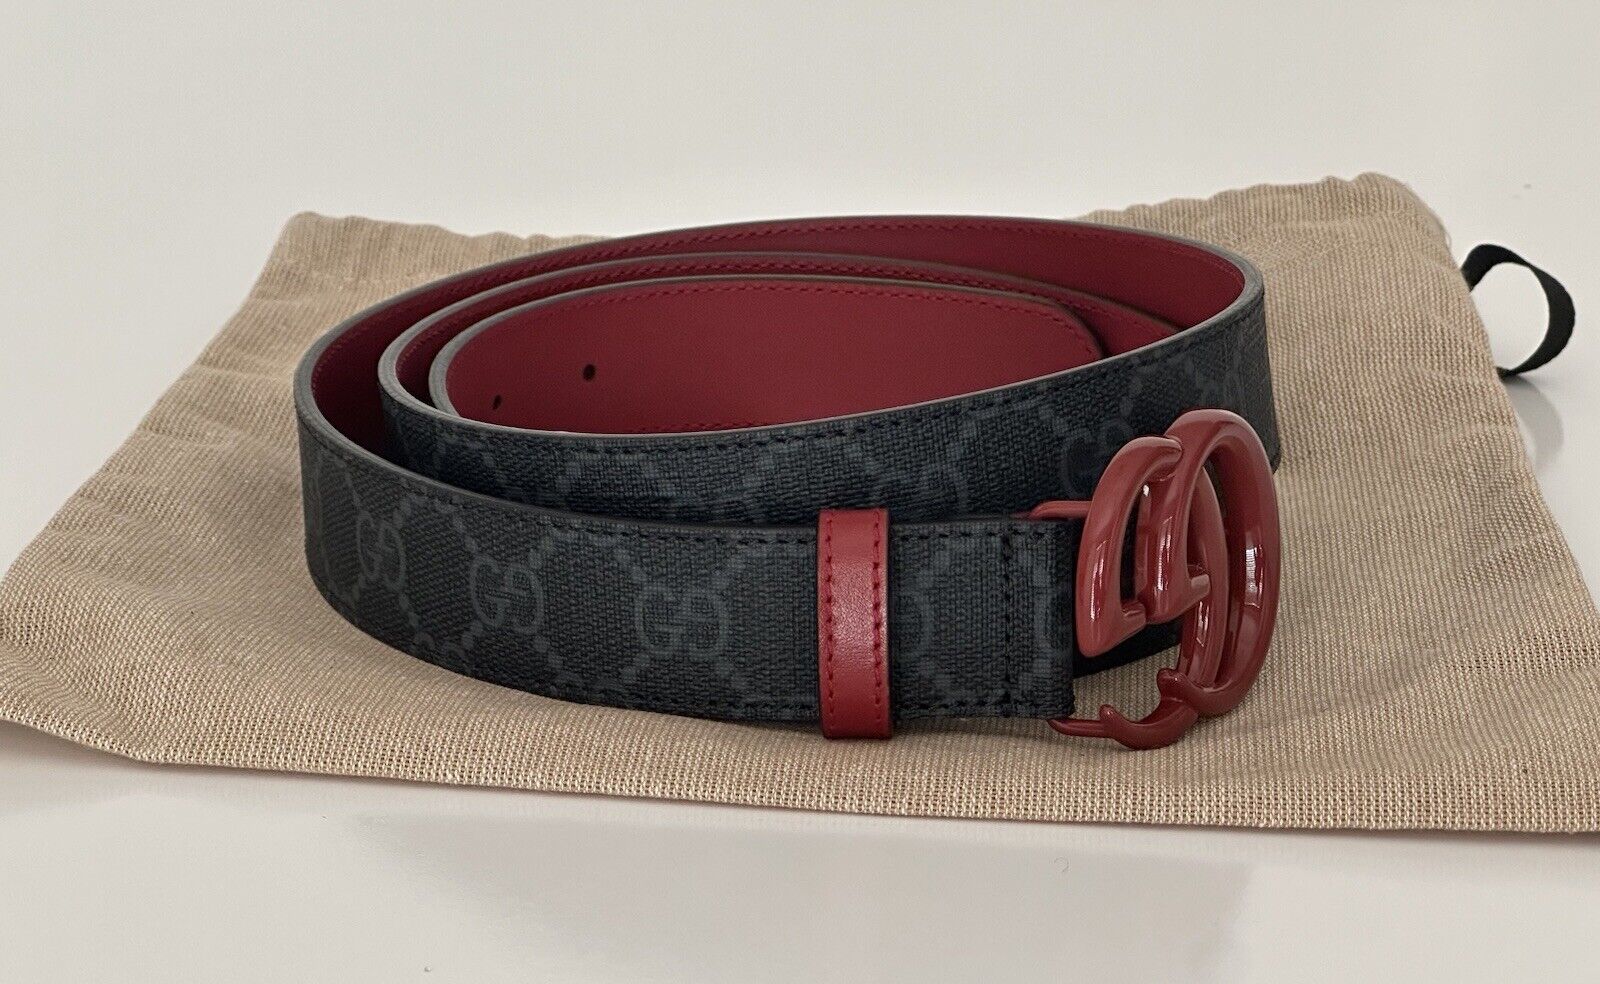 NWT Gucci Women's GG Marmont Leather Belt Black/Red  115/46 Italy 414516